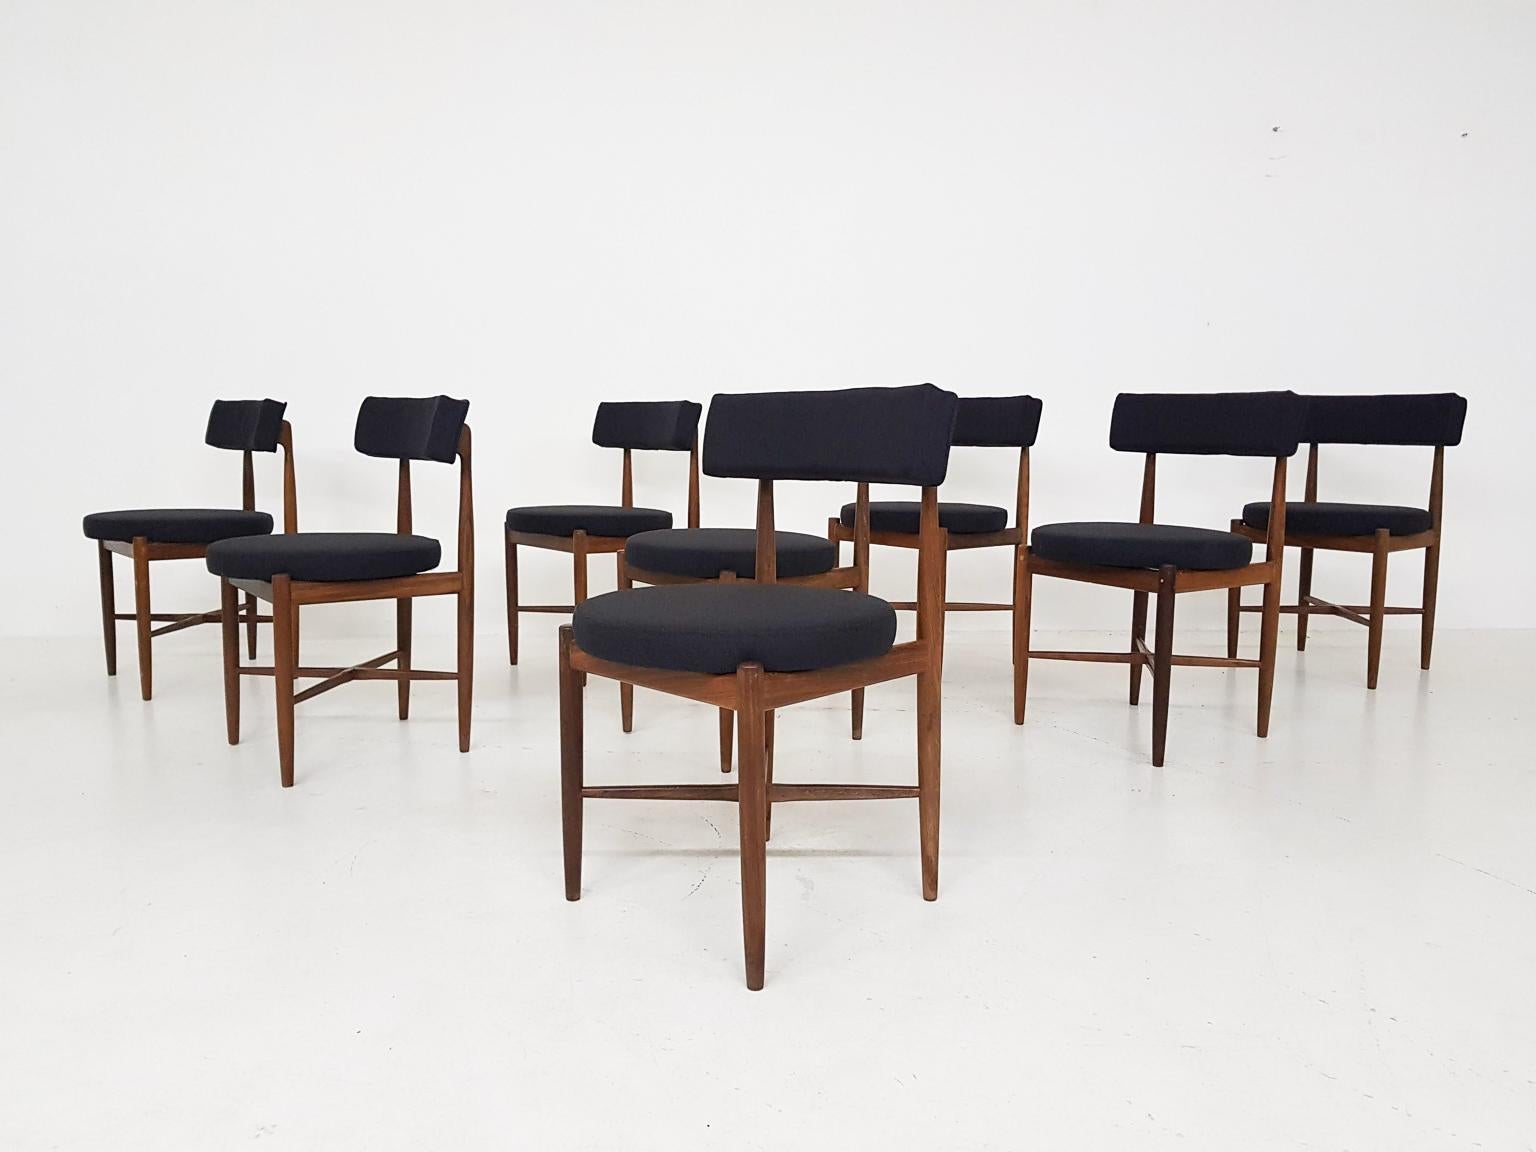 Set of eight teak dining chairs by Victor Wilkins for G-Plan, England, 1960s. The chairs have a new black upholstery.

This dining chair is designed by the British designer Victor Wilkins. The dining chair is highly influenced by the Danish